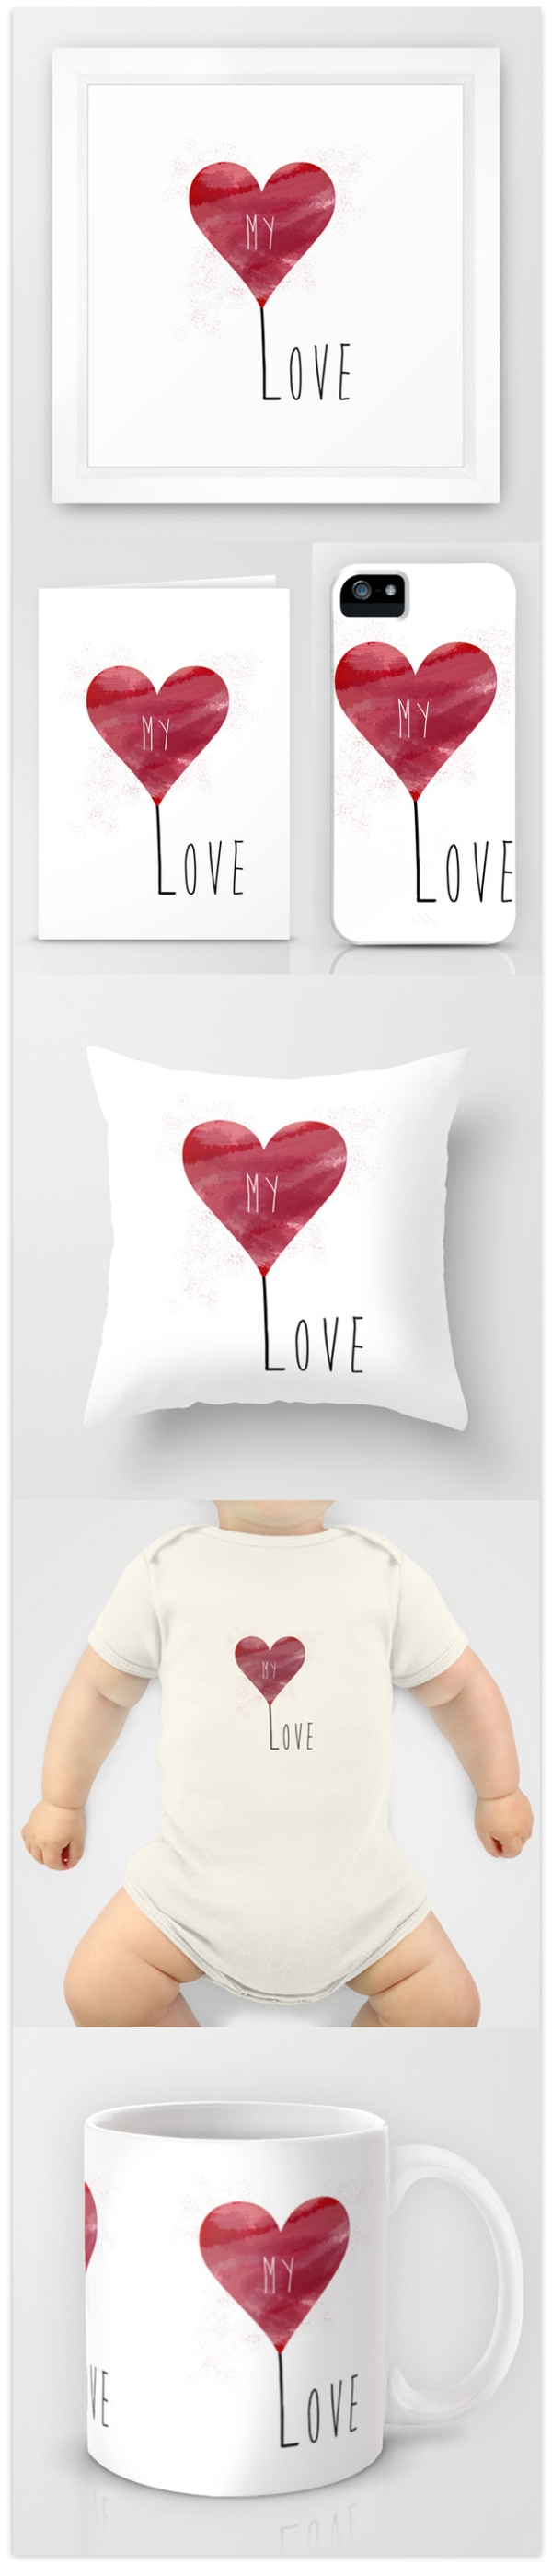 society6 valentine's collection1